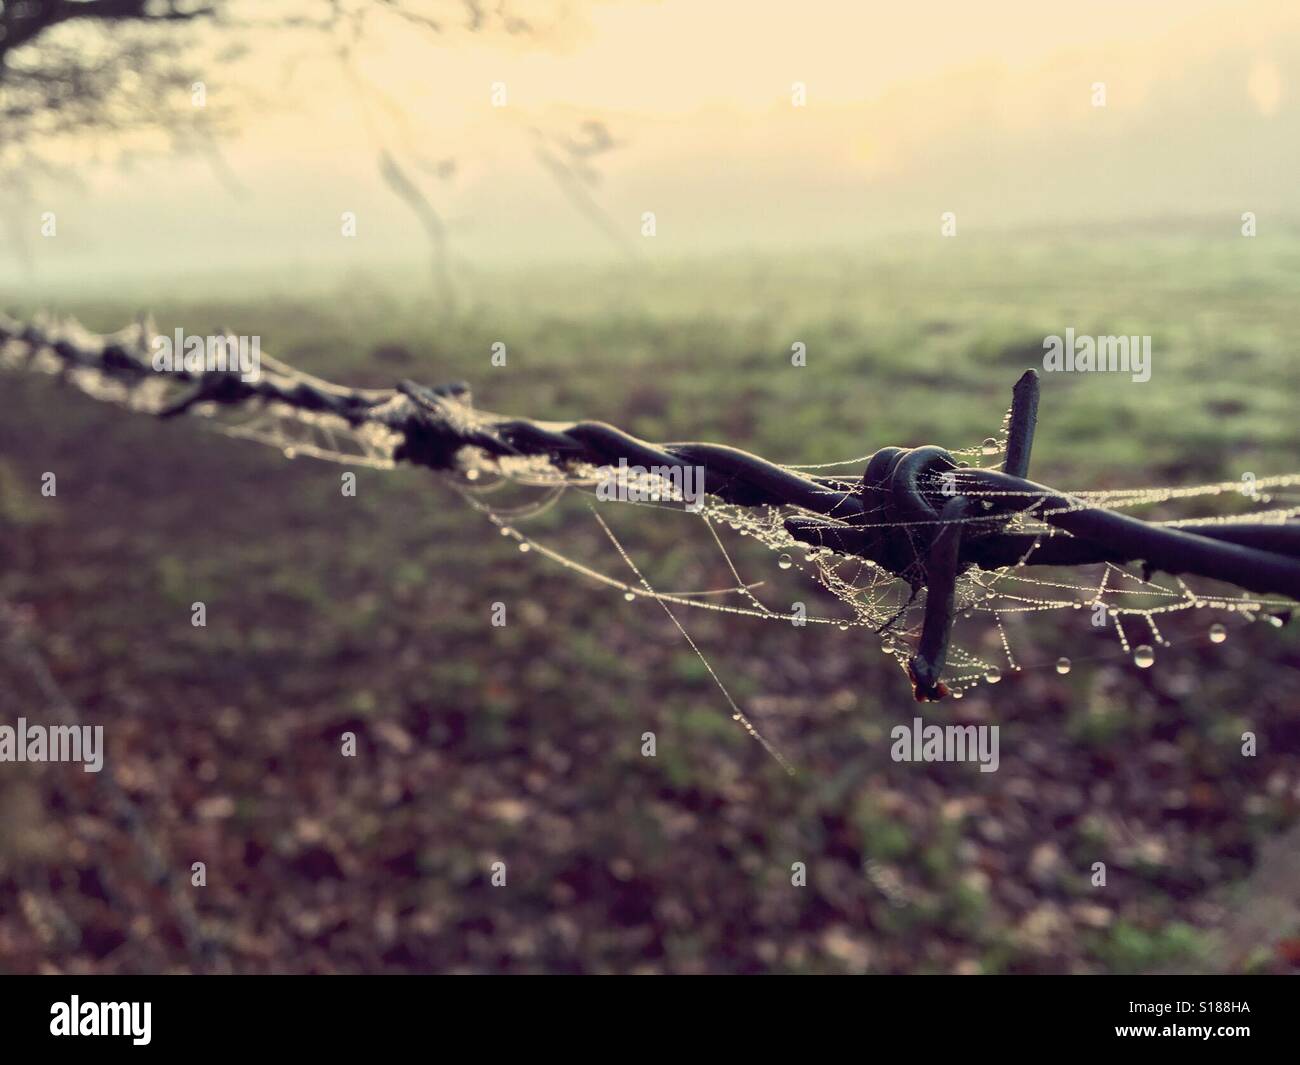 Sprider's web on barbed wire in mist and fog Stock Photo